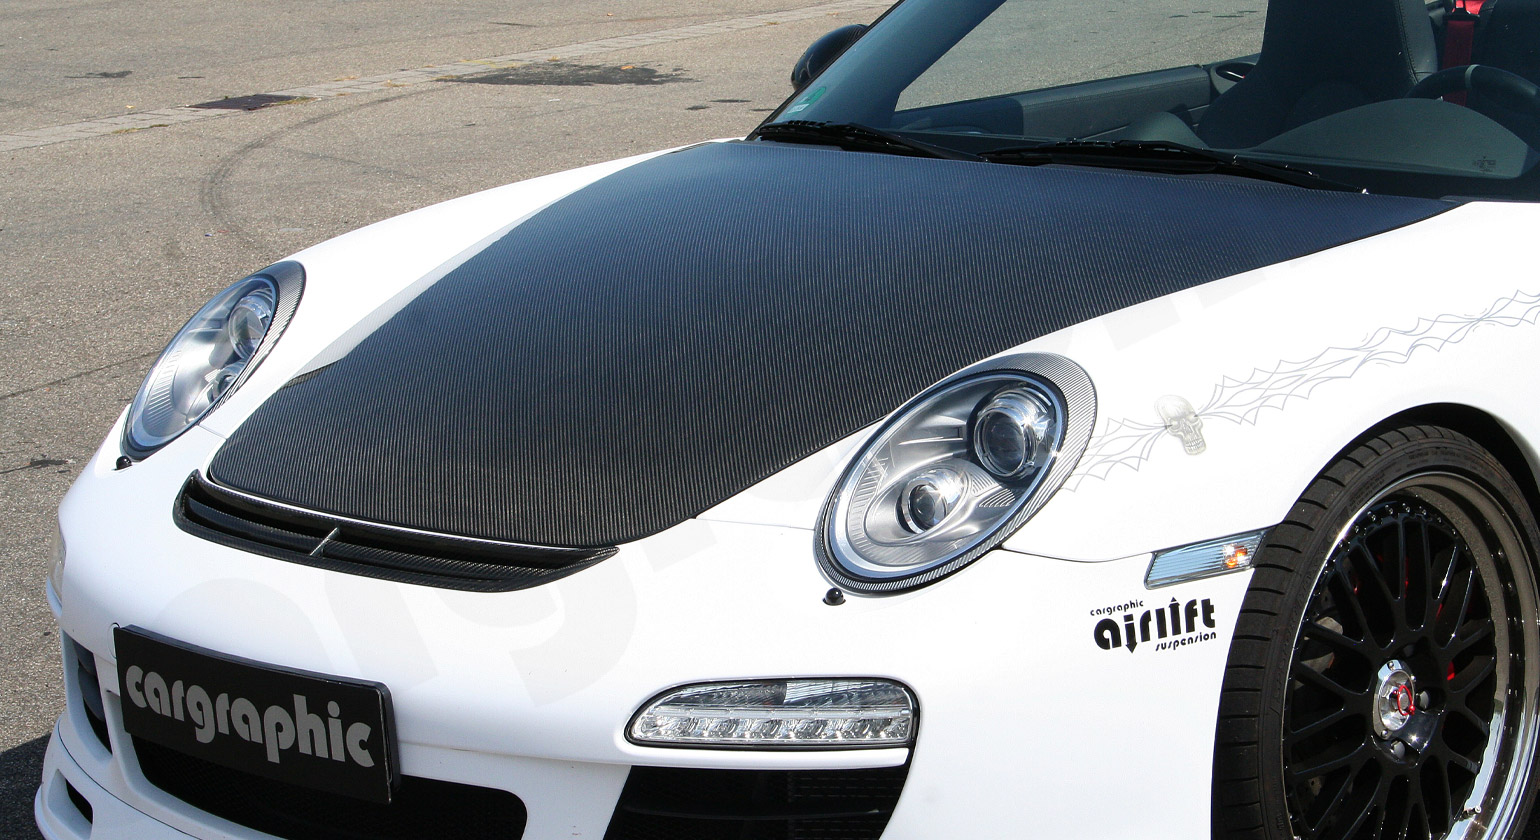 Cargraphic Carbon front food for Porsche | Y-squared ― ワイ